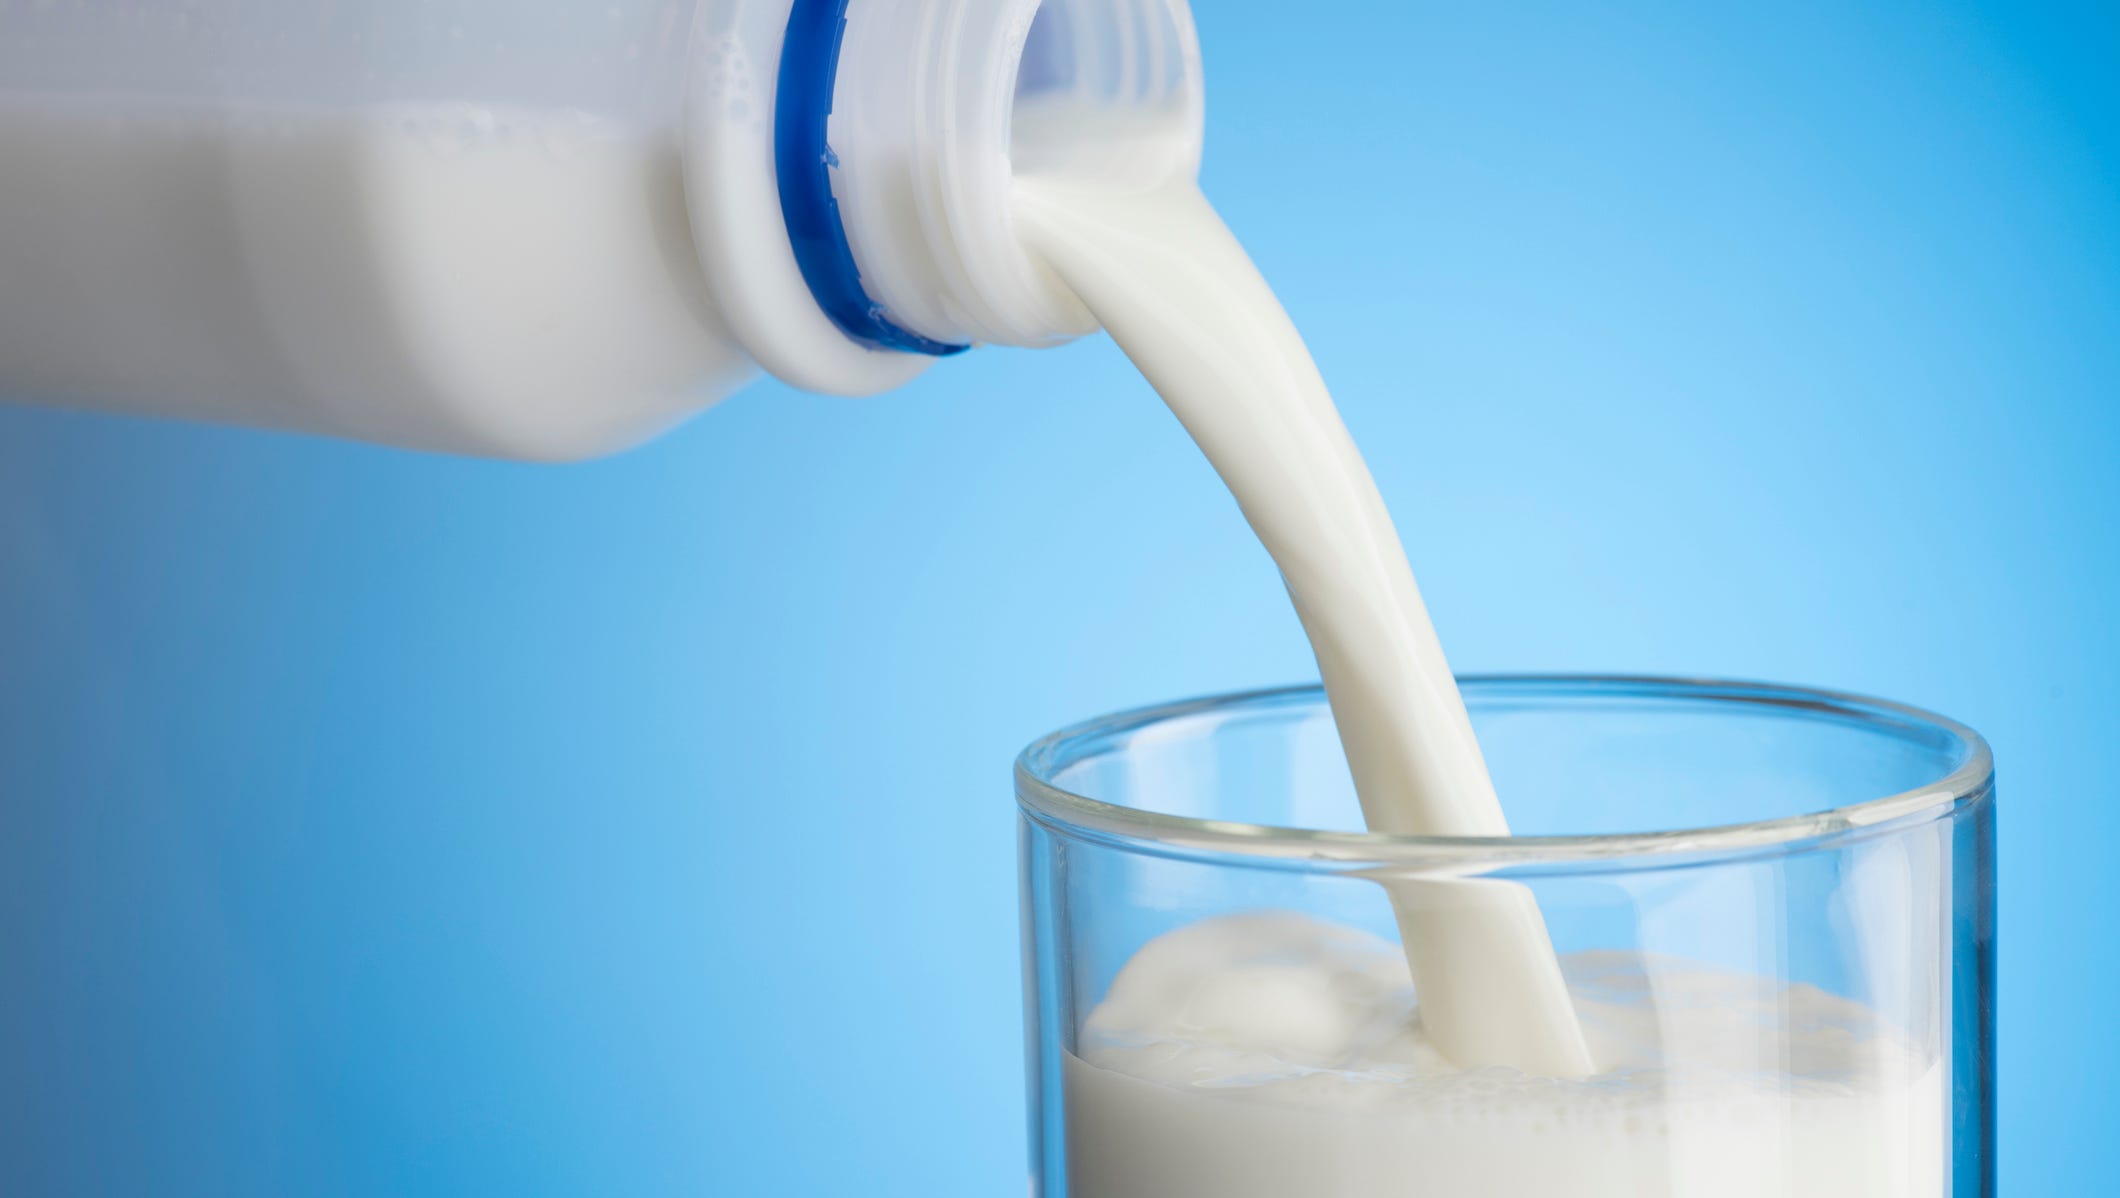 Got milk? This is the kind you should be drinking